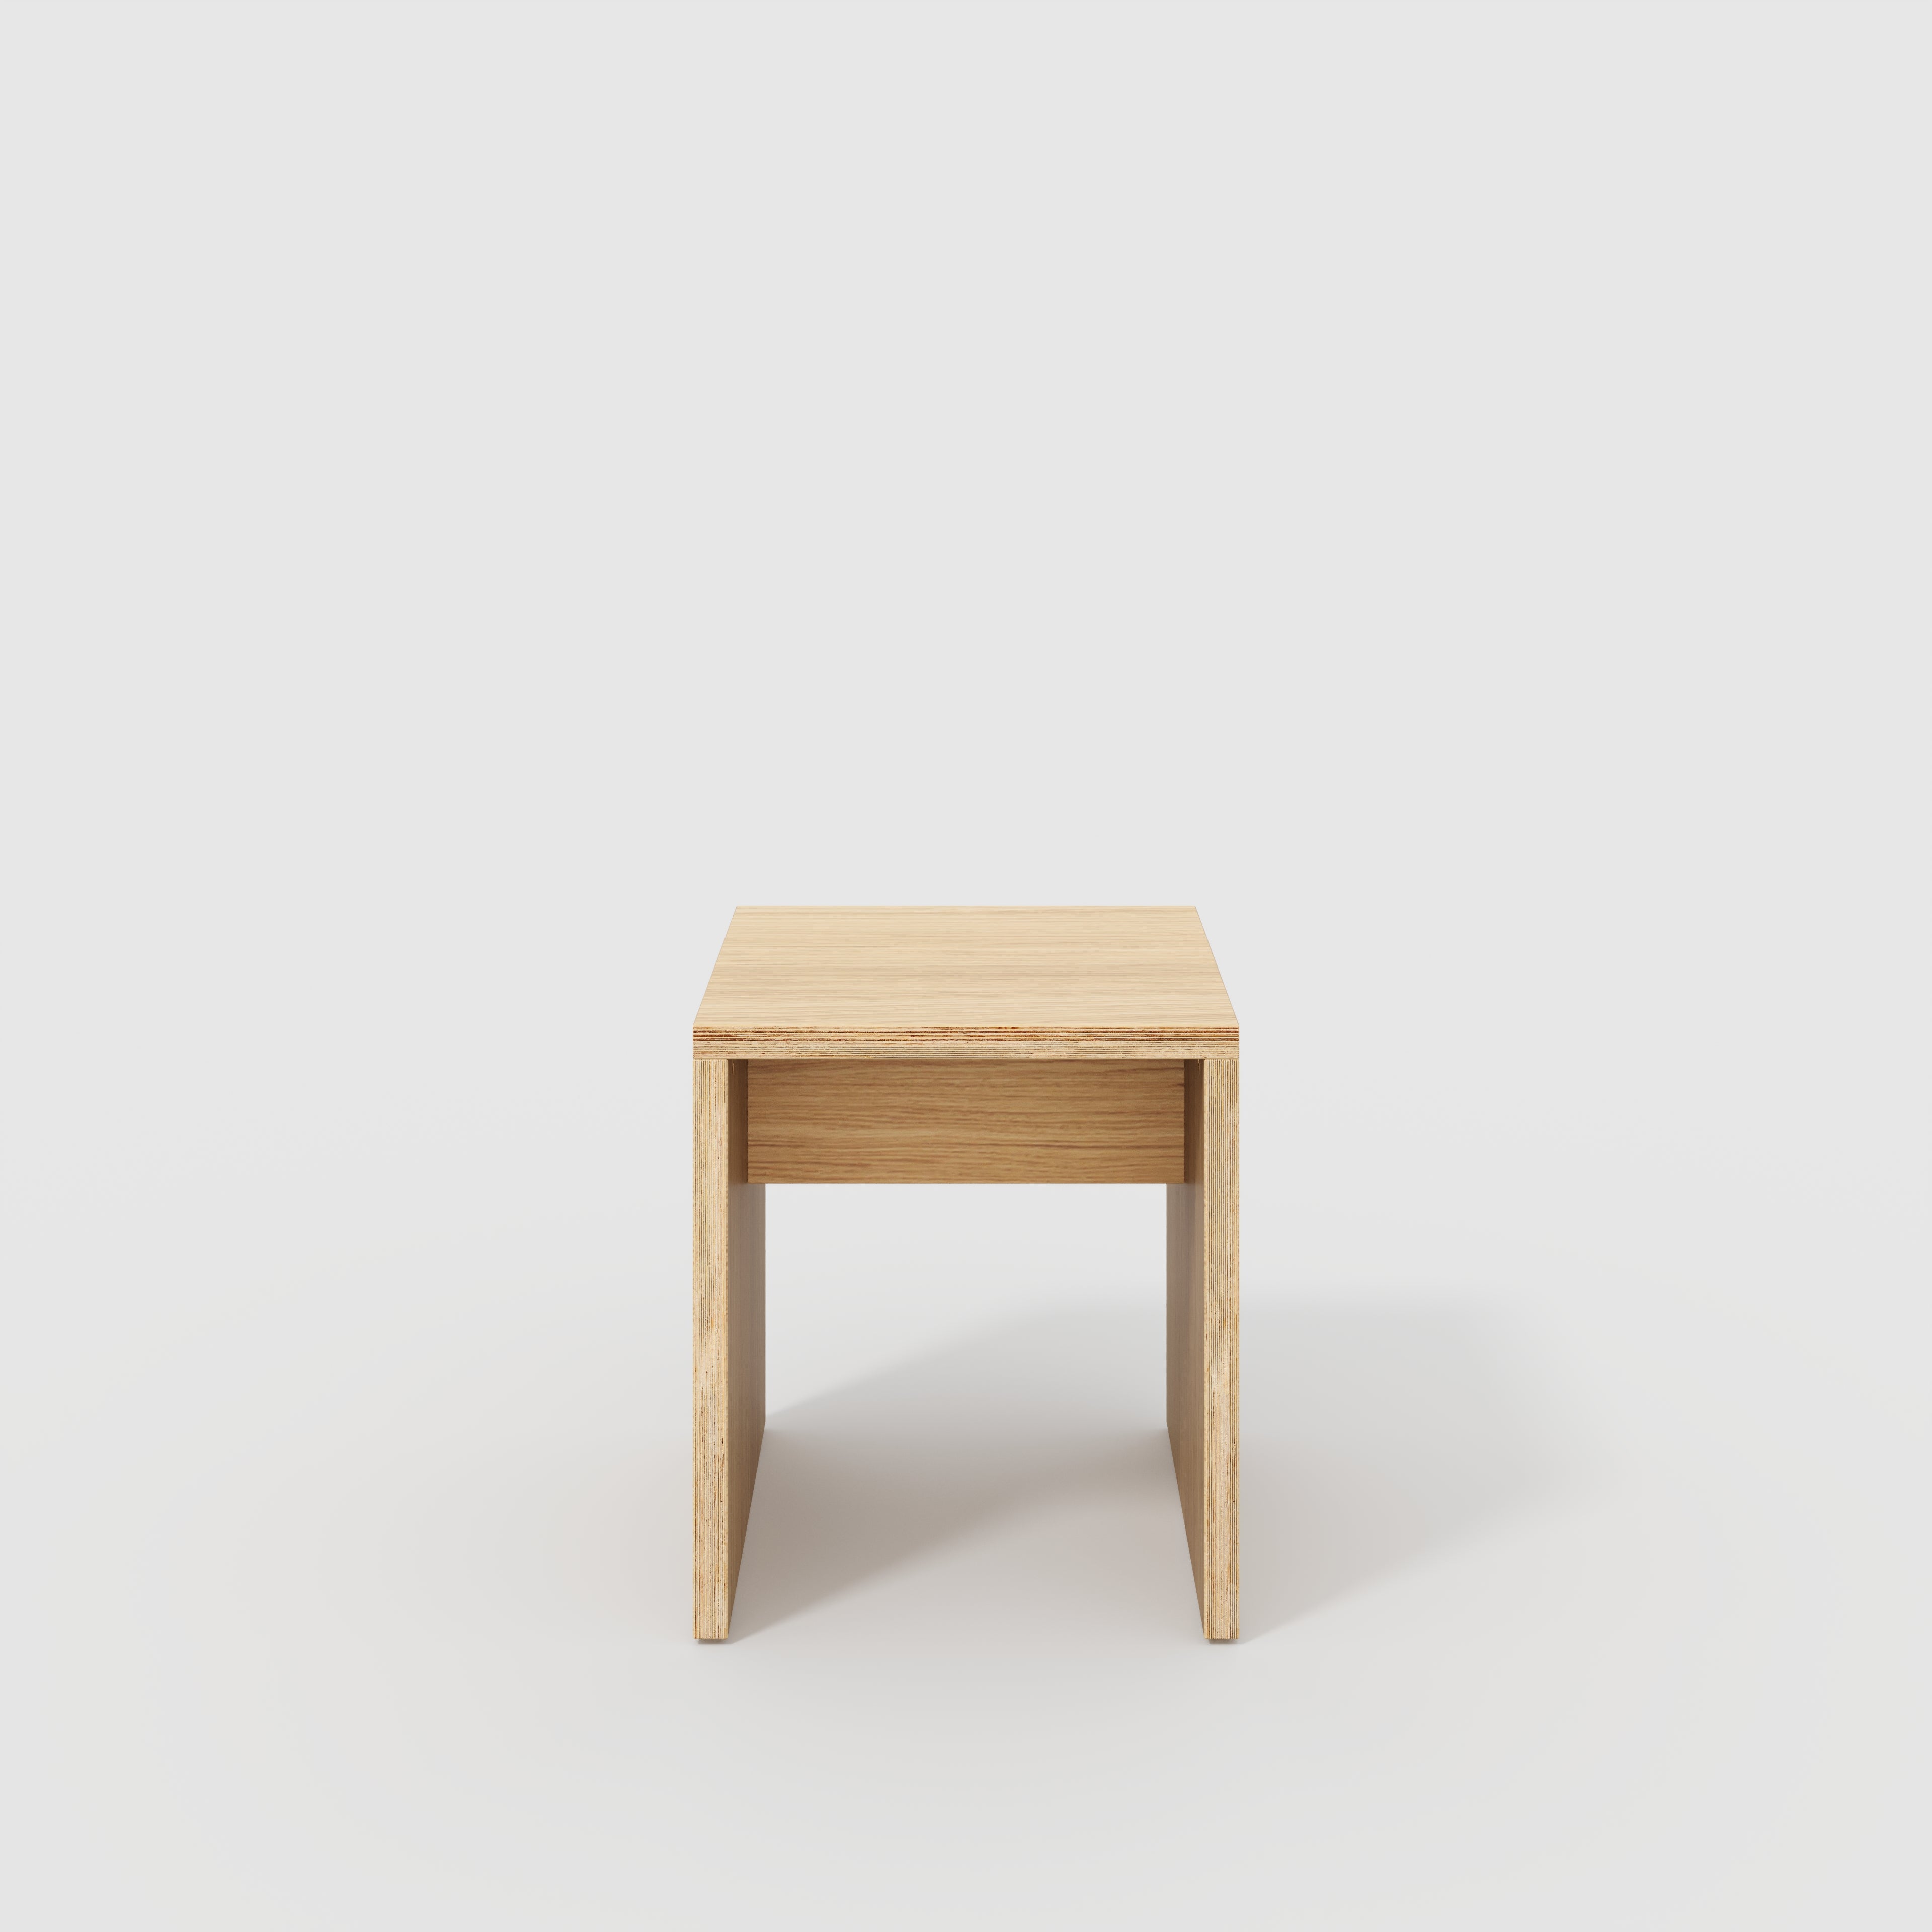 Stool with Solid Sides - Plywood Oak - 400(w) x 400(d) x 450(h)